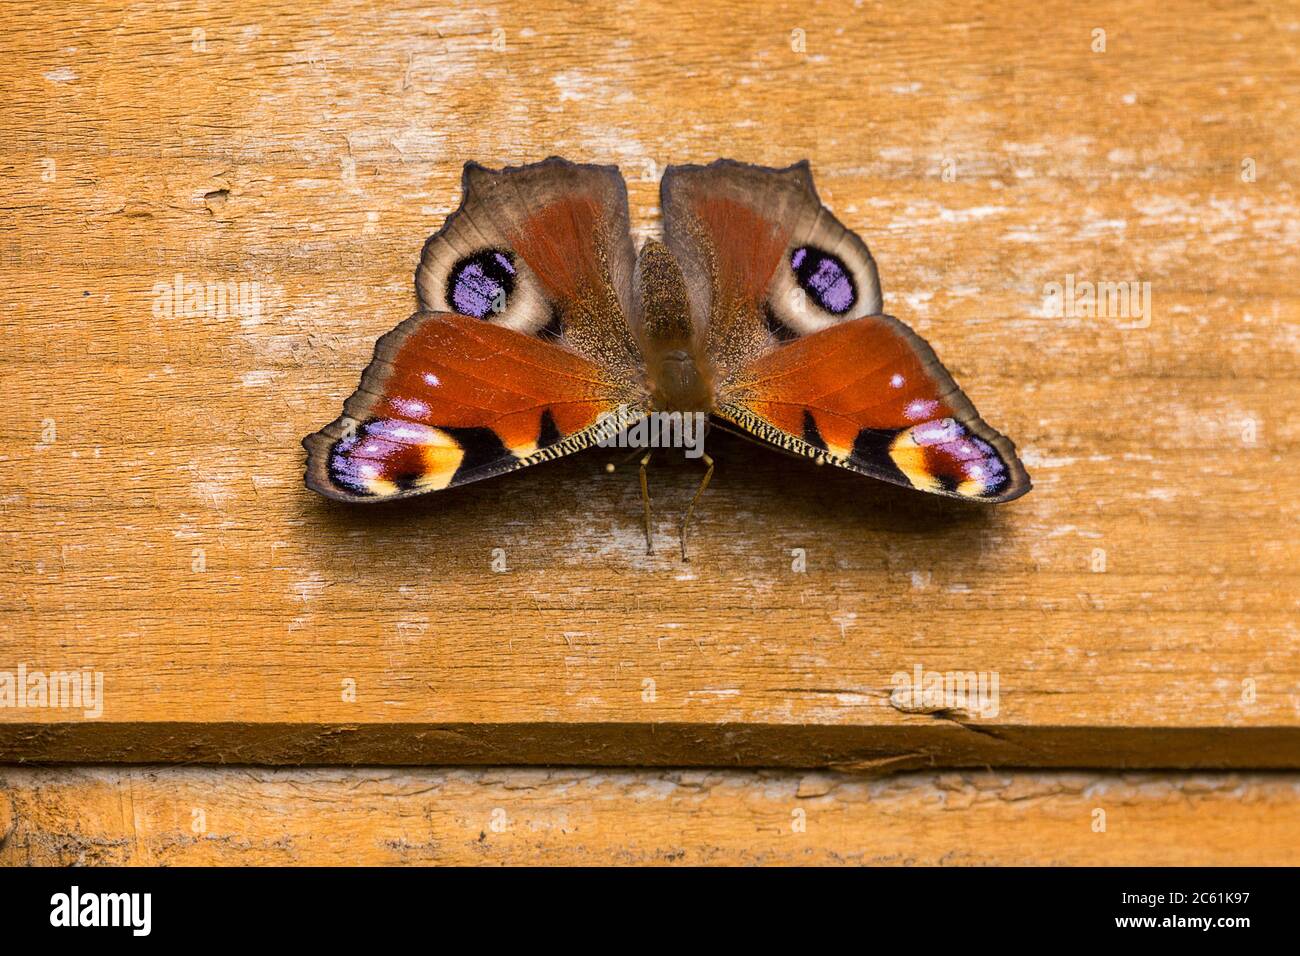 Peacock butterfly (Inachis io) maroon upperwings with bold eye like markings in purple creamy white black and smoky grey. Underwings smoky brown Stock Photo